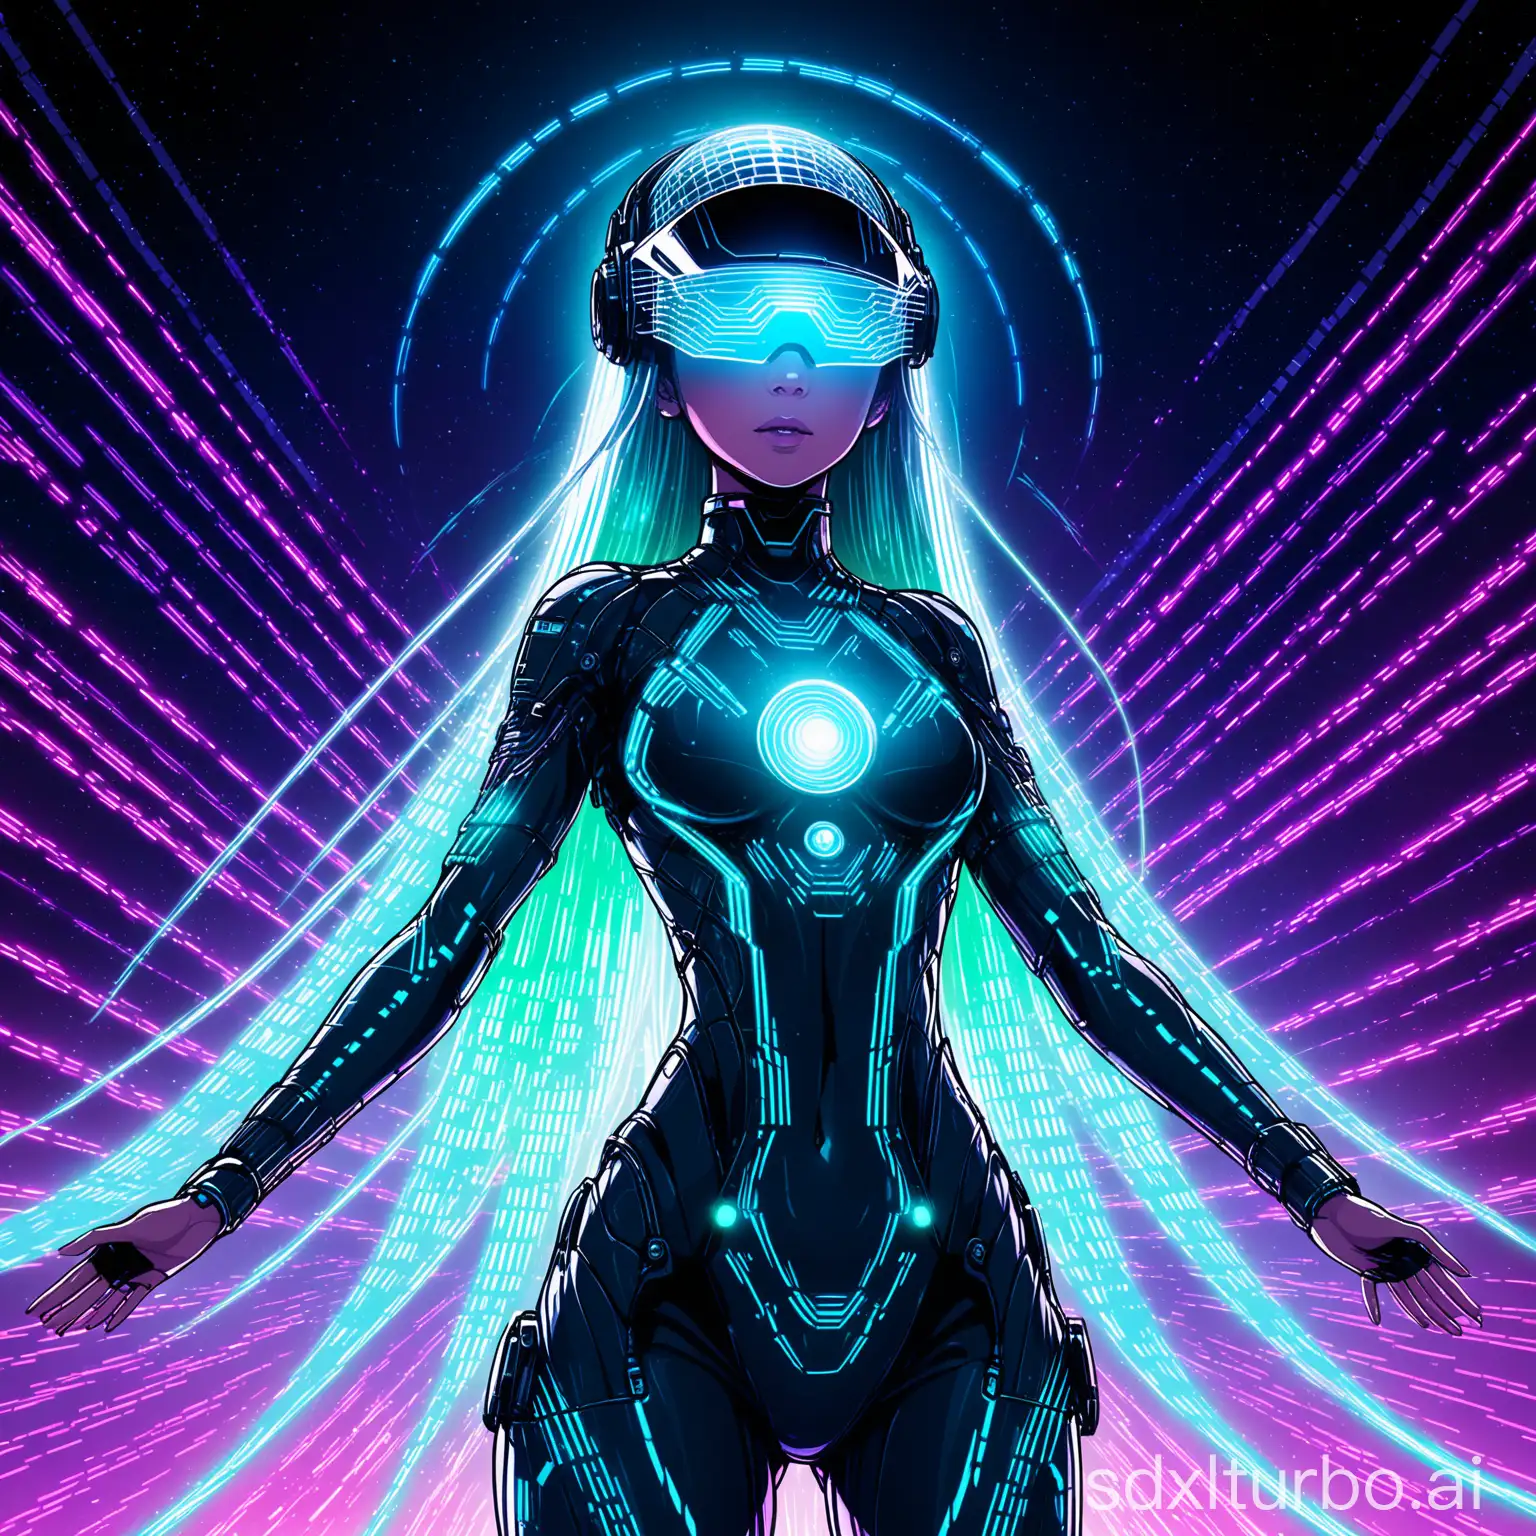 Futuristic-Cyberpunk-Synthwave-Musician-Glowing-AI-Avatar-with-Neon-Hair-and-Holographic-Music-Waves